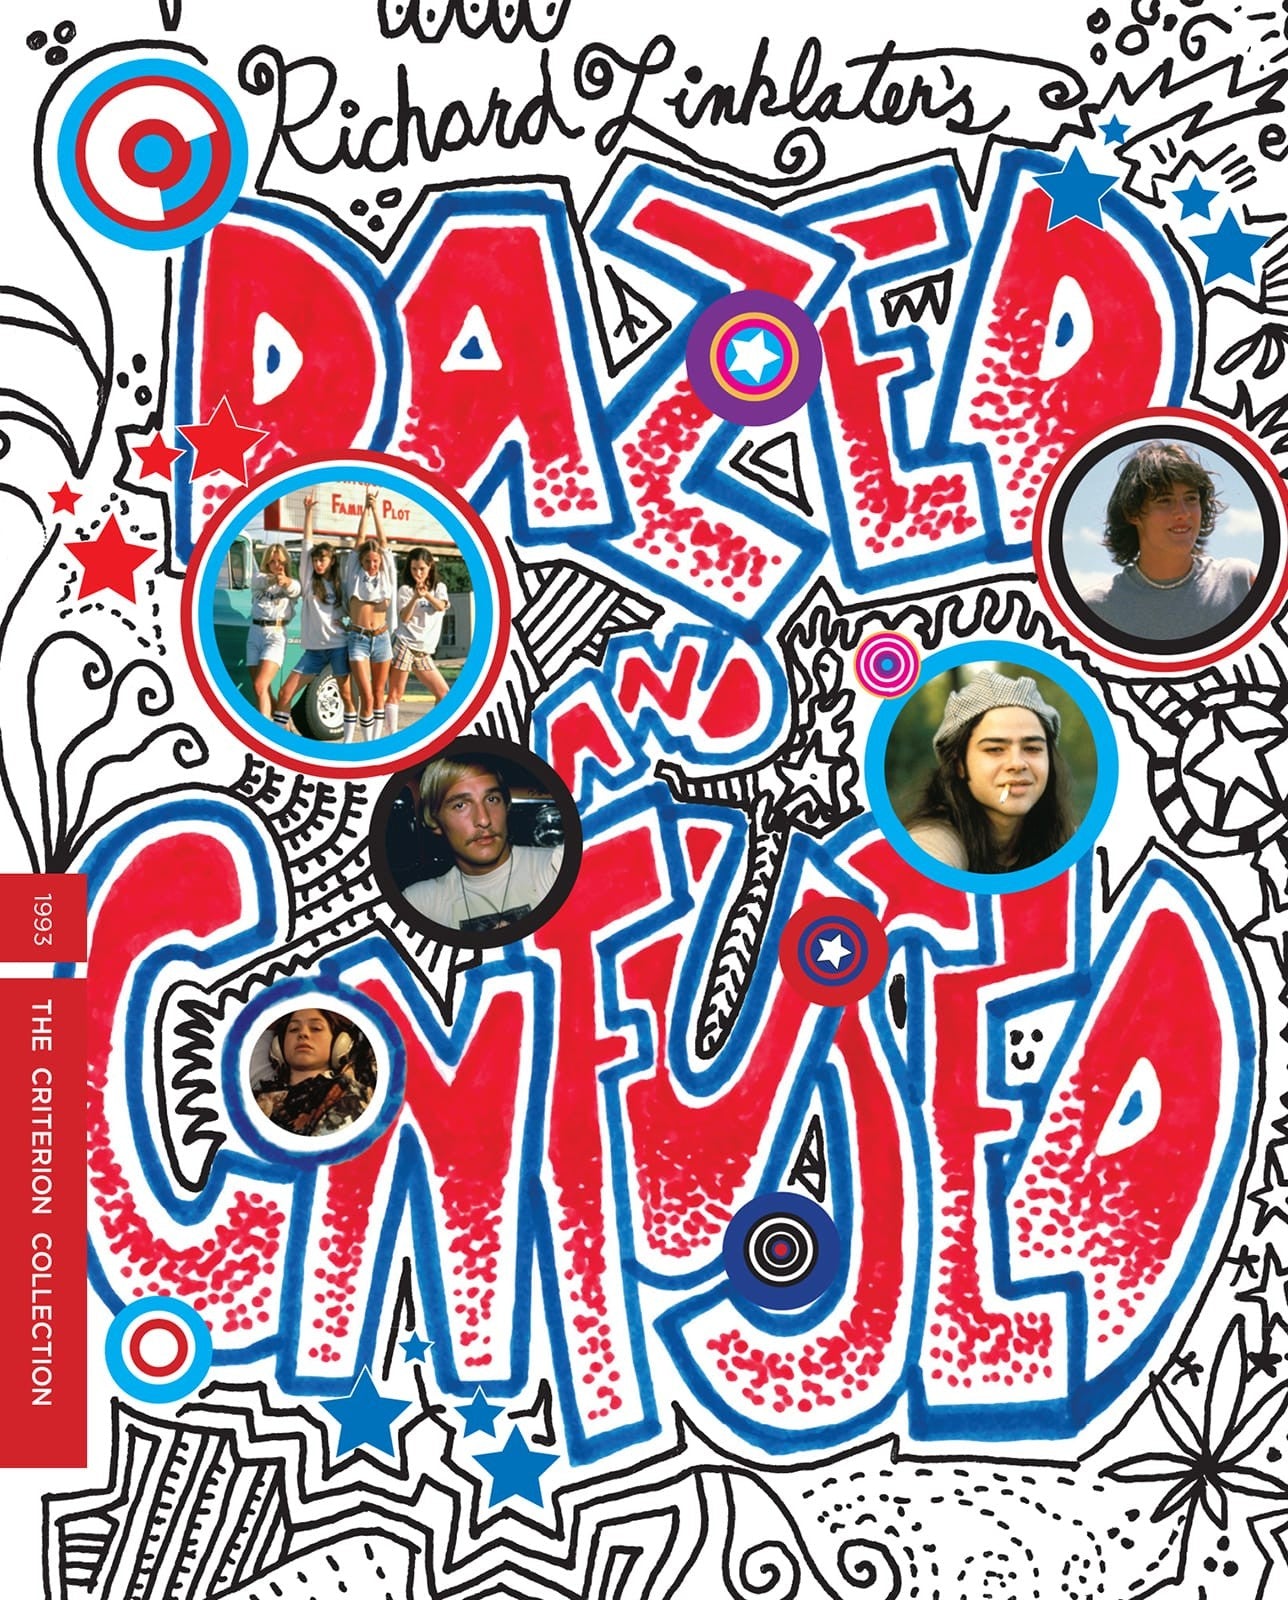 Dazed and Confused The Criterion Collection 4K UHD/Blu-Ray [NEW] [SLIPCOVER]